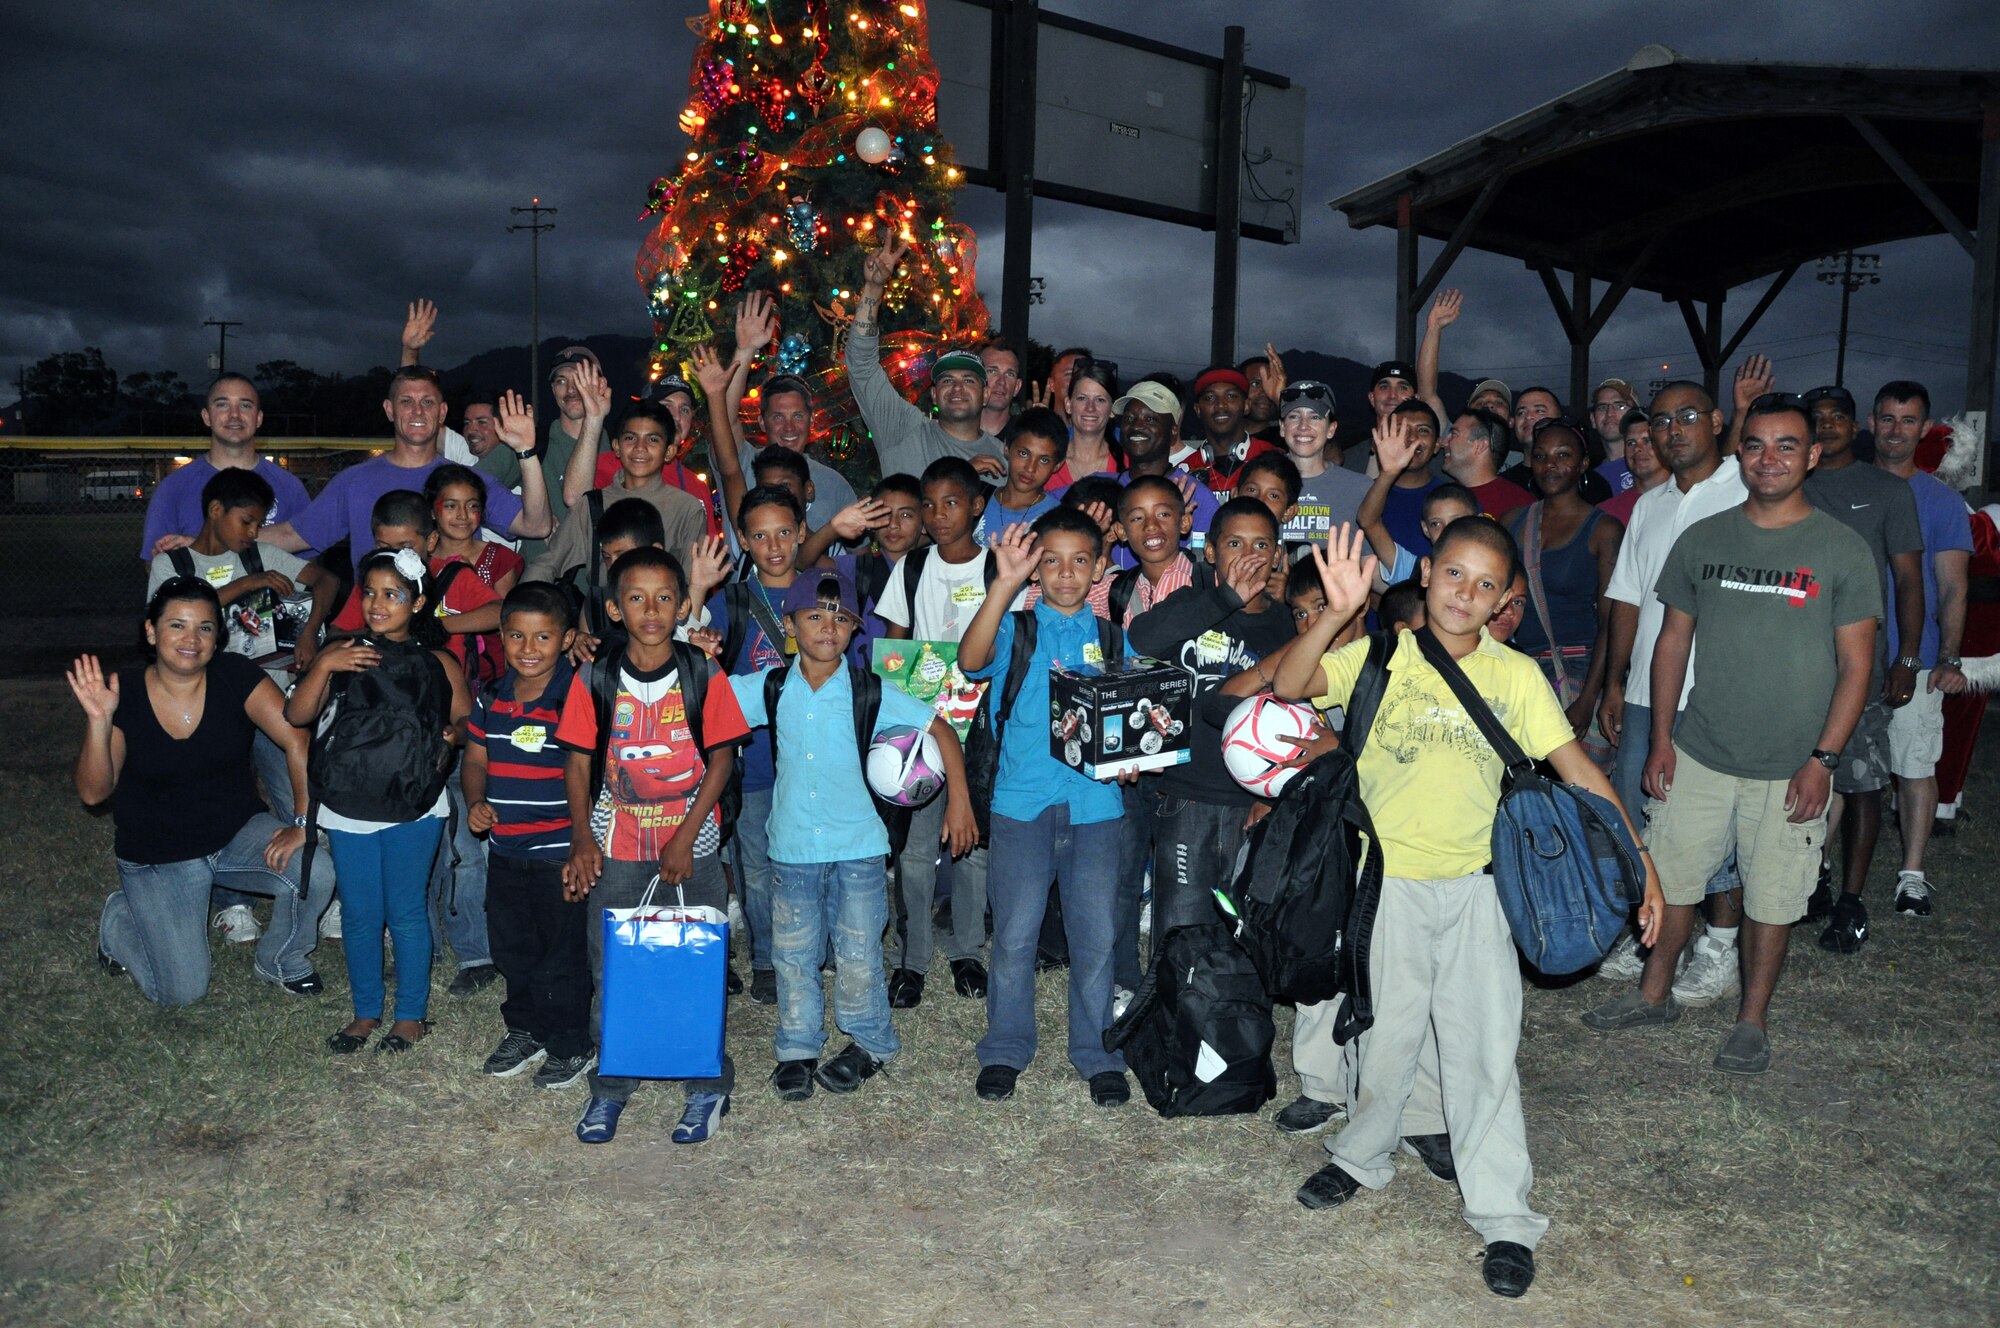 Honduran orphans and members of Joint Task Force-Bravo pose in front of the tree during Joint Task Force-Bravo's "Operation Holiday Blessing," at Soto Cano Air Base, Honduras, Dec. 6, 2013.  More than 300 Honduran orphans were treated to a day of activities, gifts, and holiday joy, provided by more than 200 volunteers from the Task Force.  (U.S. Air Force photo by Capt. Zach Anderson)